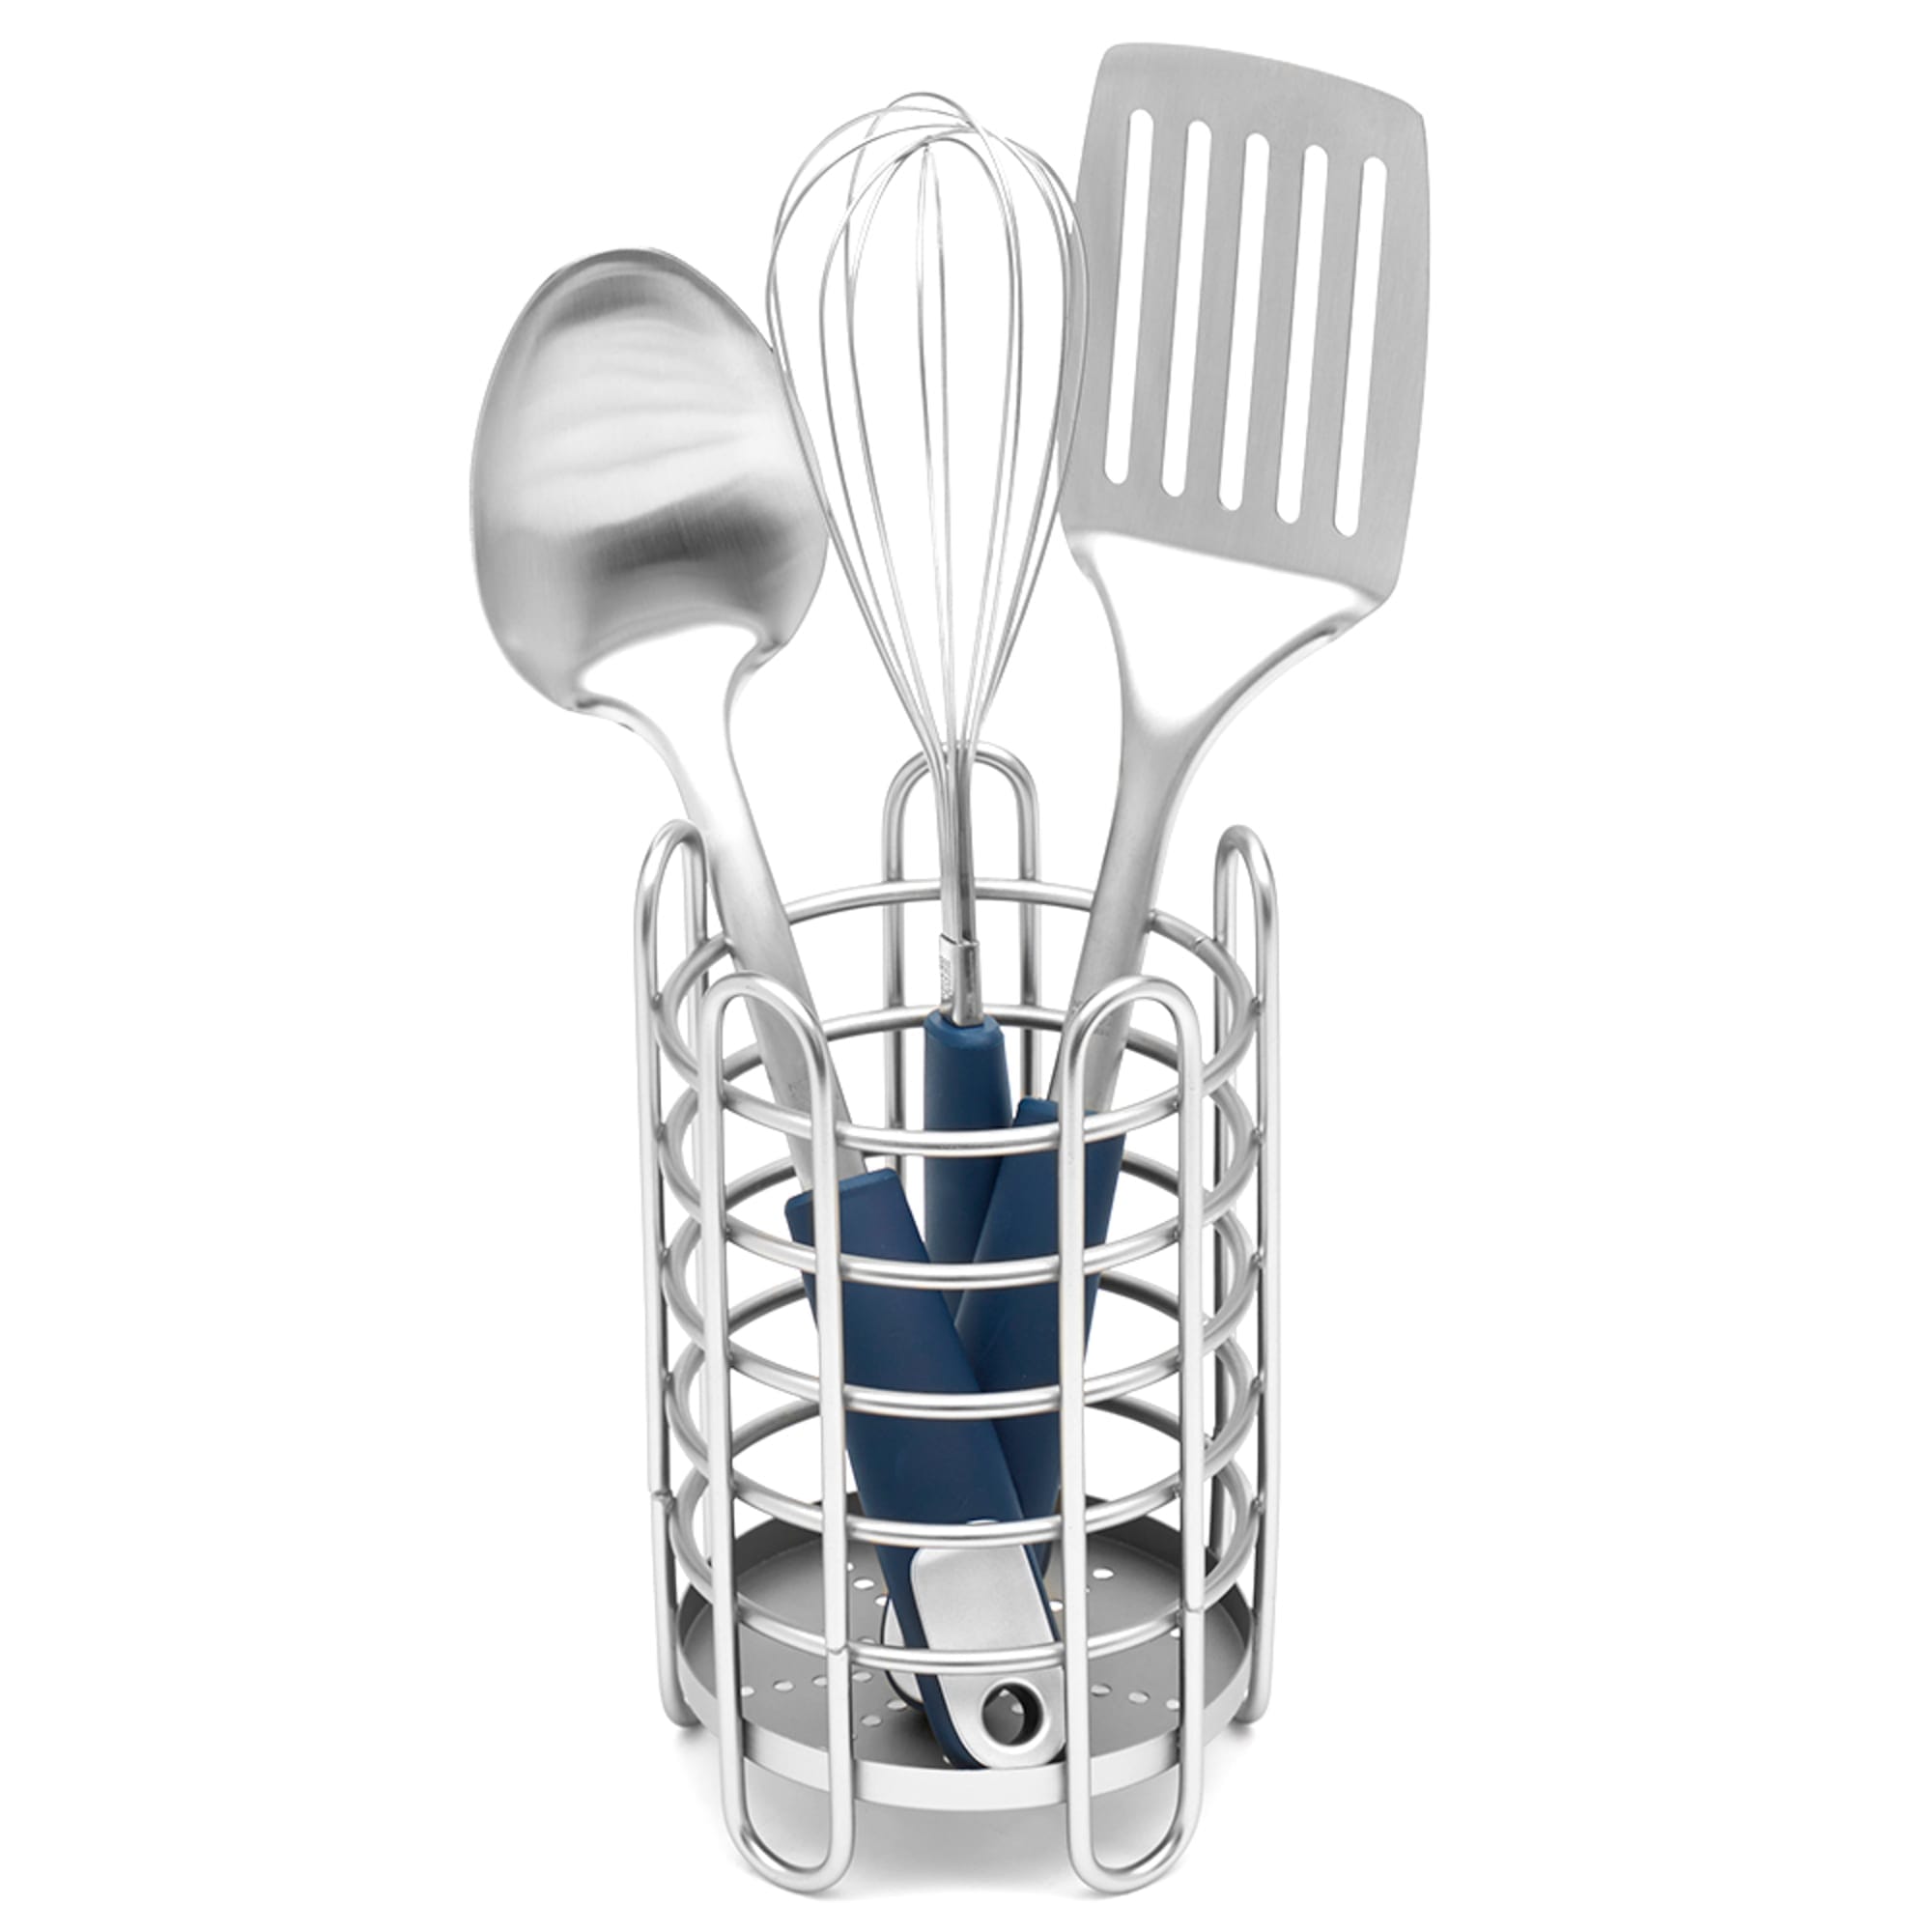 Michael Graves Design Simplicity Freestanding Steel Utensil Holder with Perforated Bottom, Satin Nickel $10.00 EACH, CASE PACK OF 6